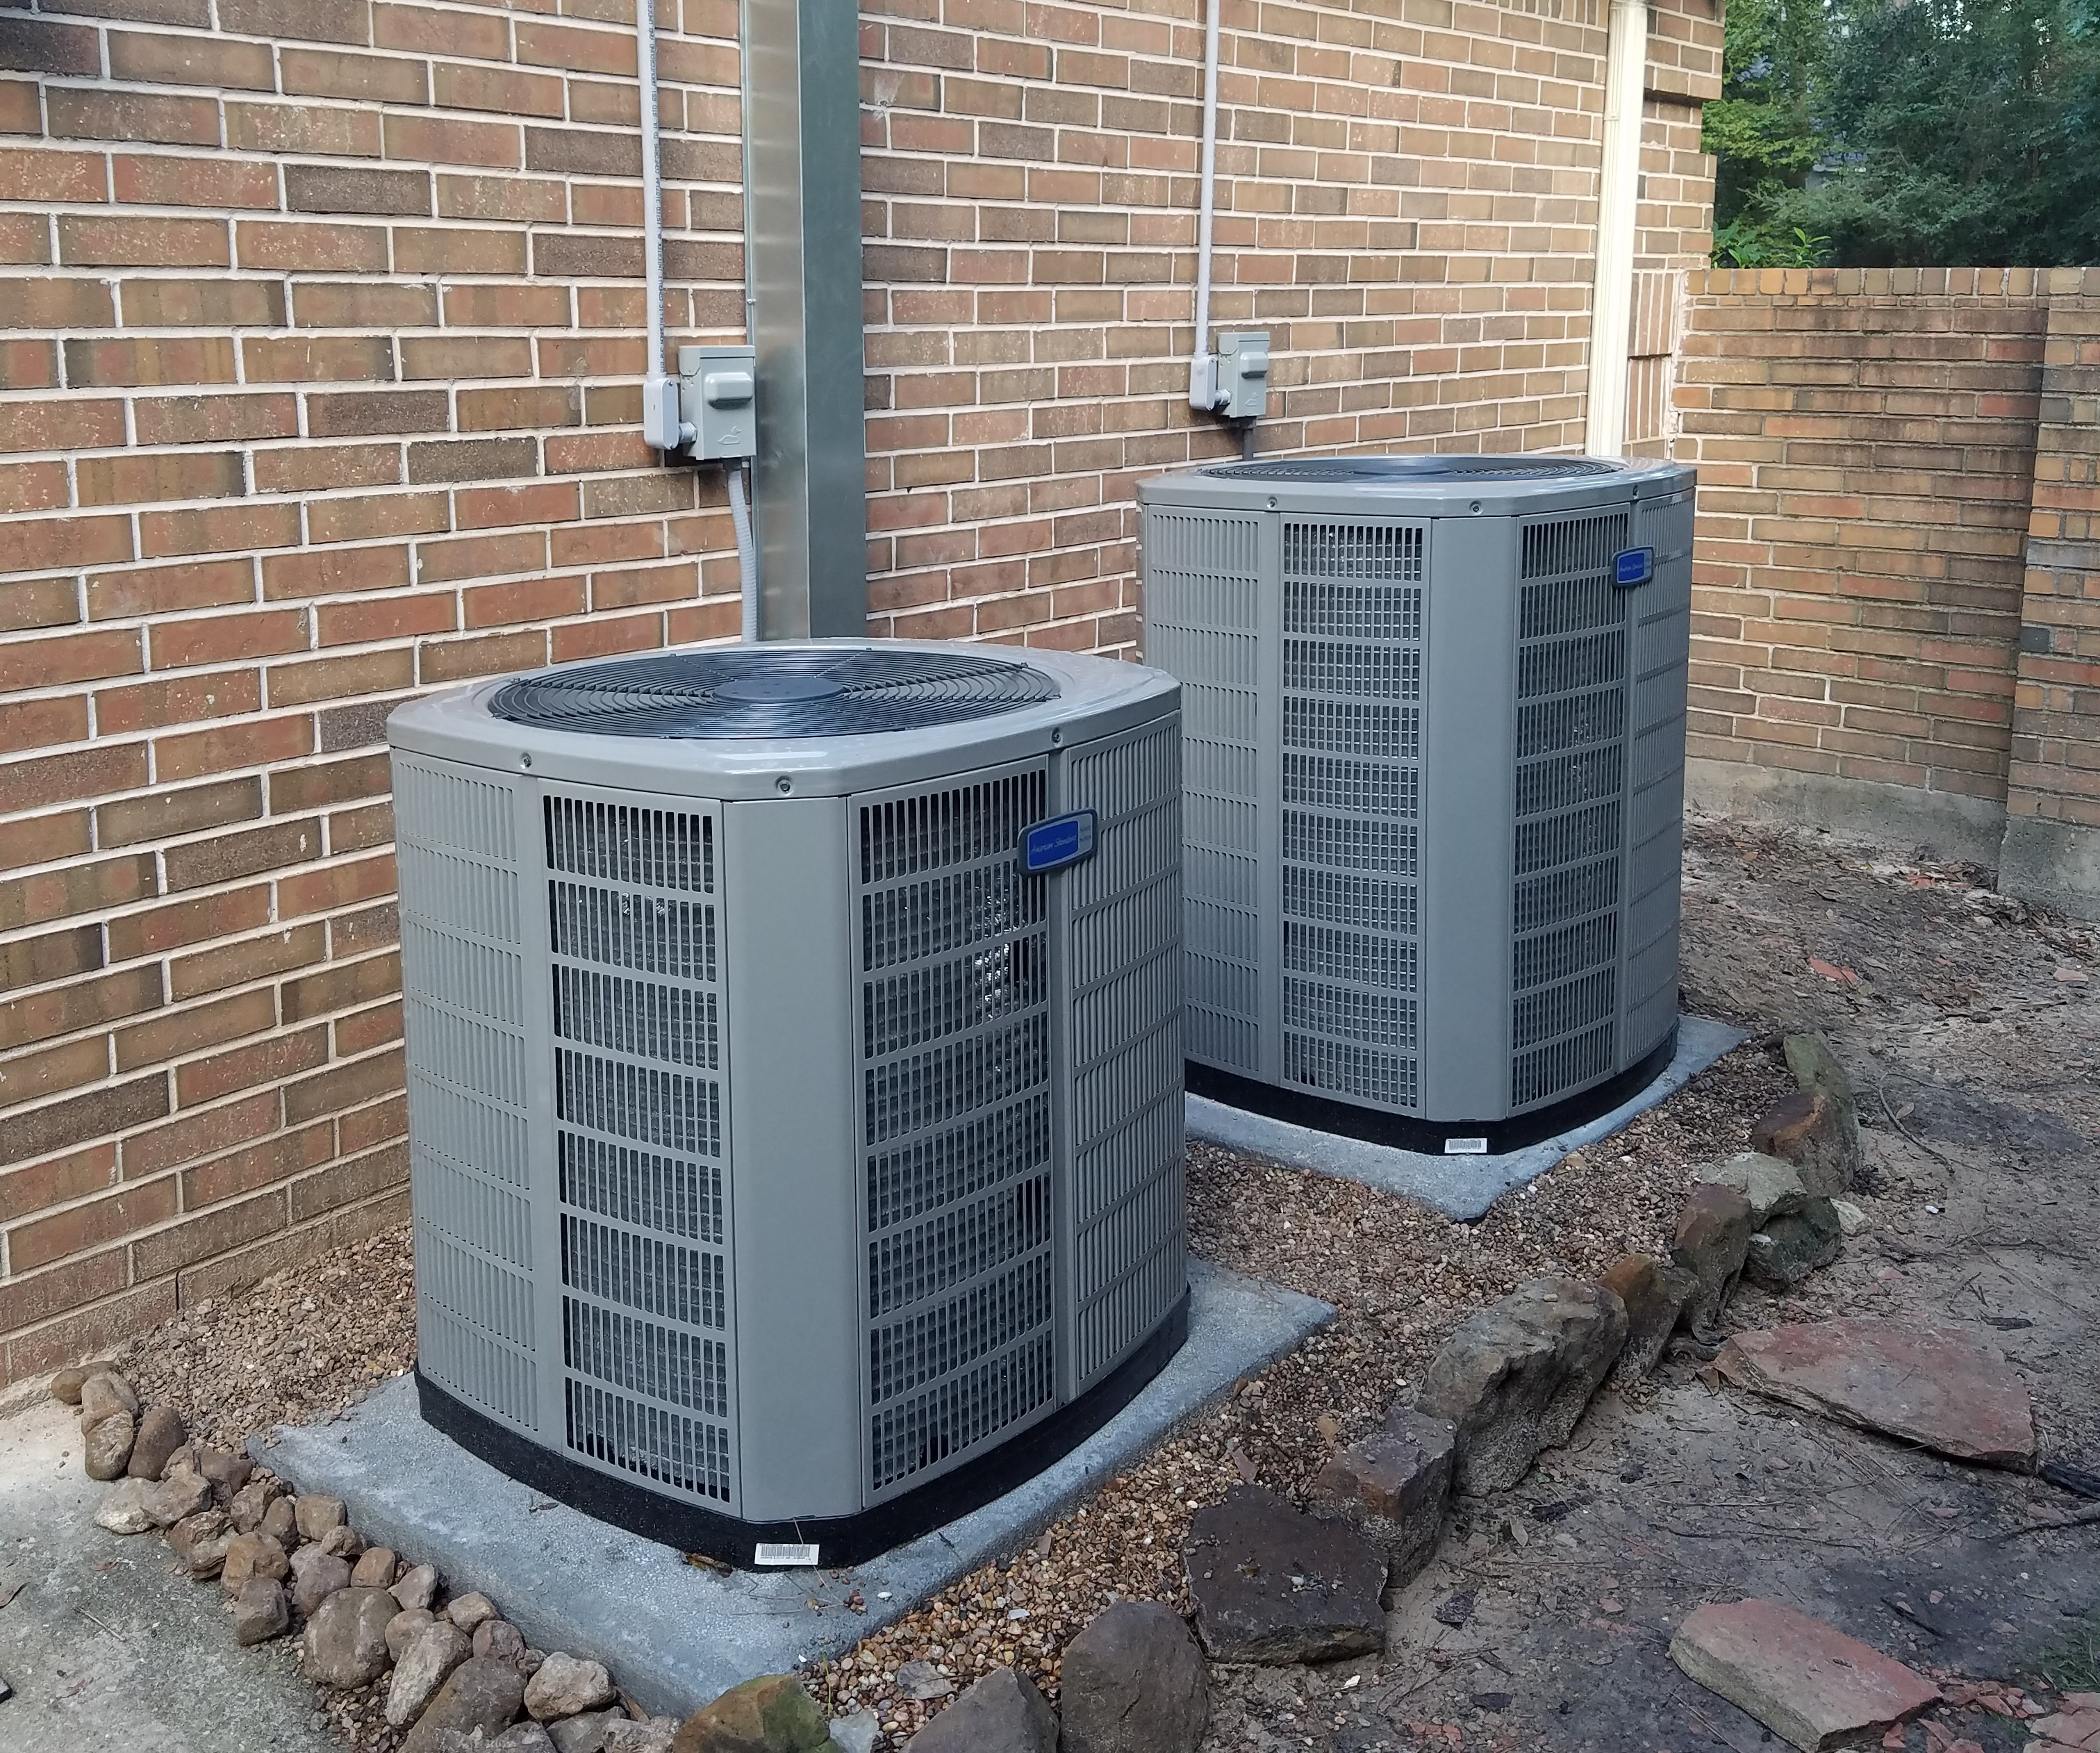 A/C Plus Air Conditioning and Heating Company in Conroe, TX Air Conditioning Contractors